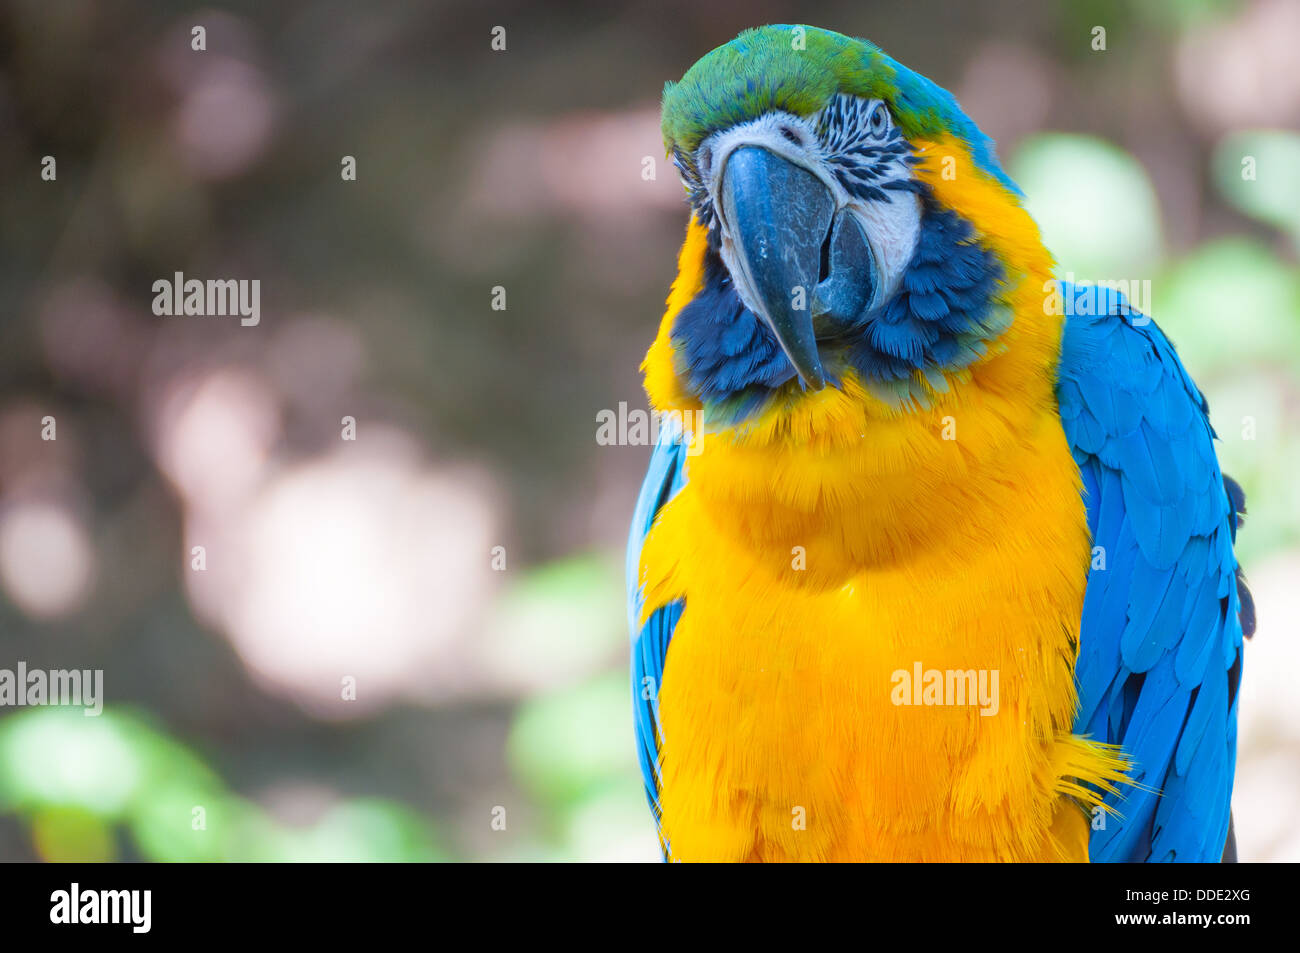 Blue-and-yellow Macaw Parrot Sitting on Branch Stock Photo